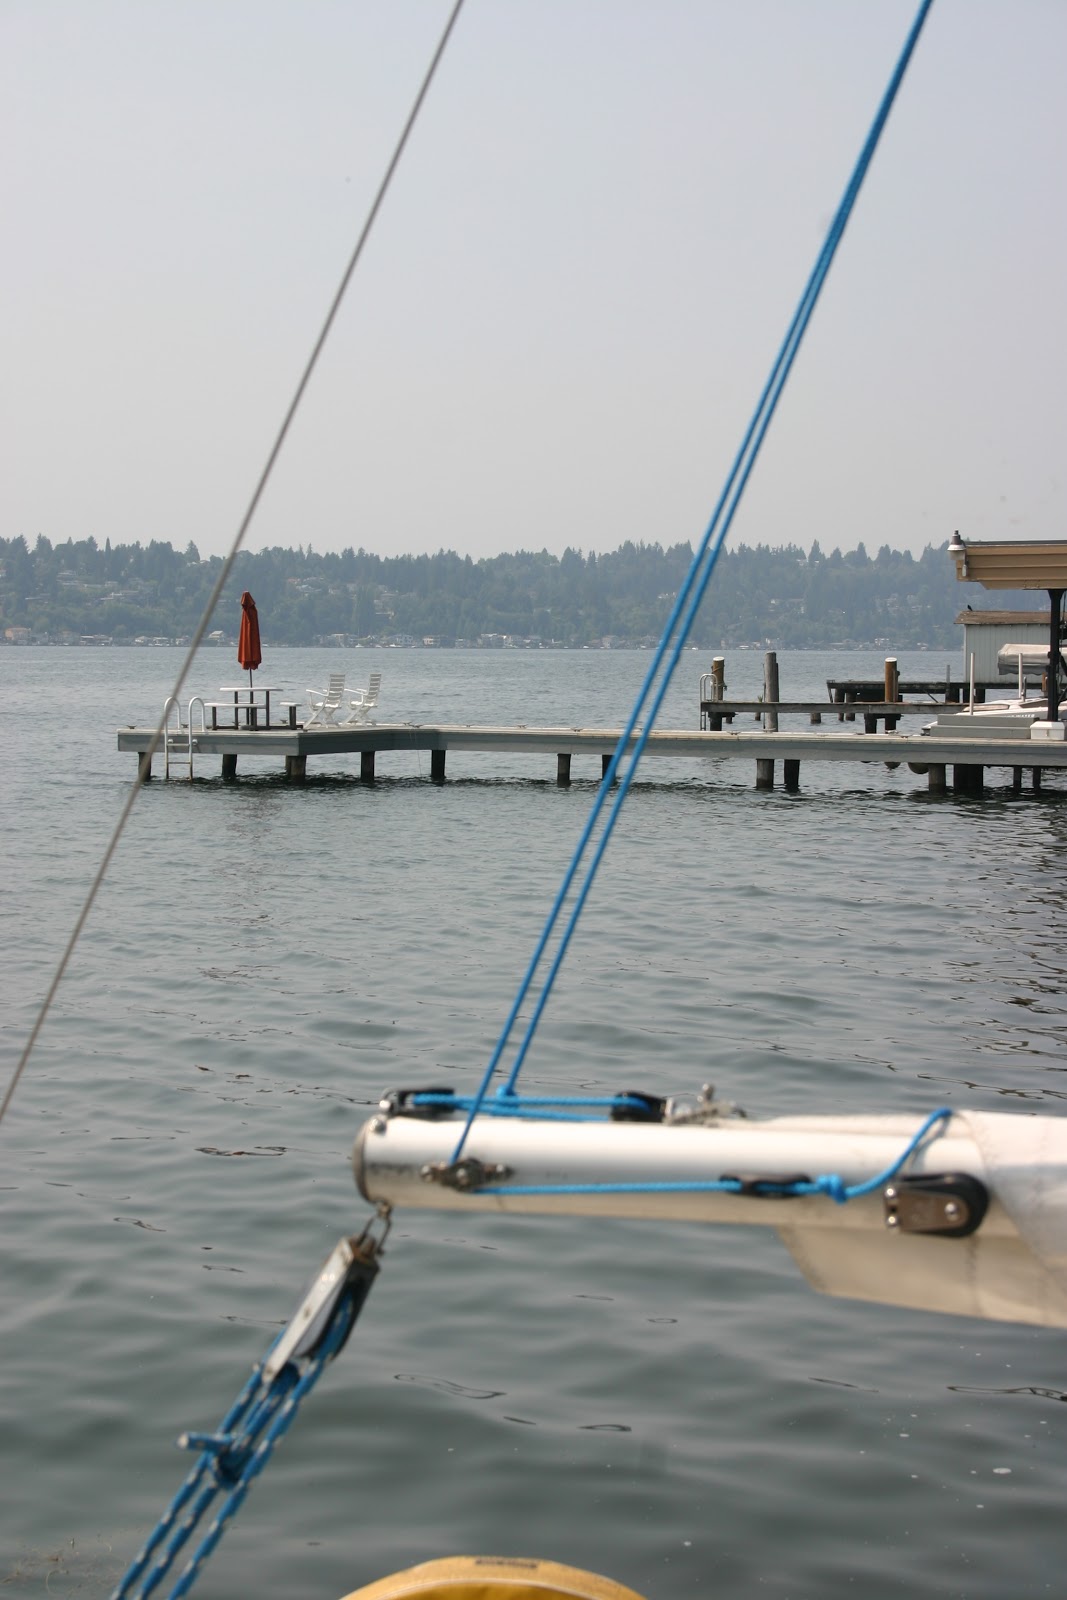 what is a topping lift on a sailboat